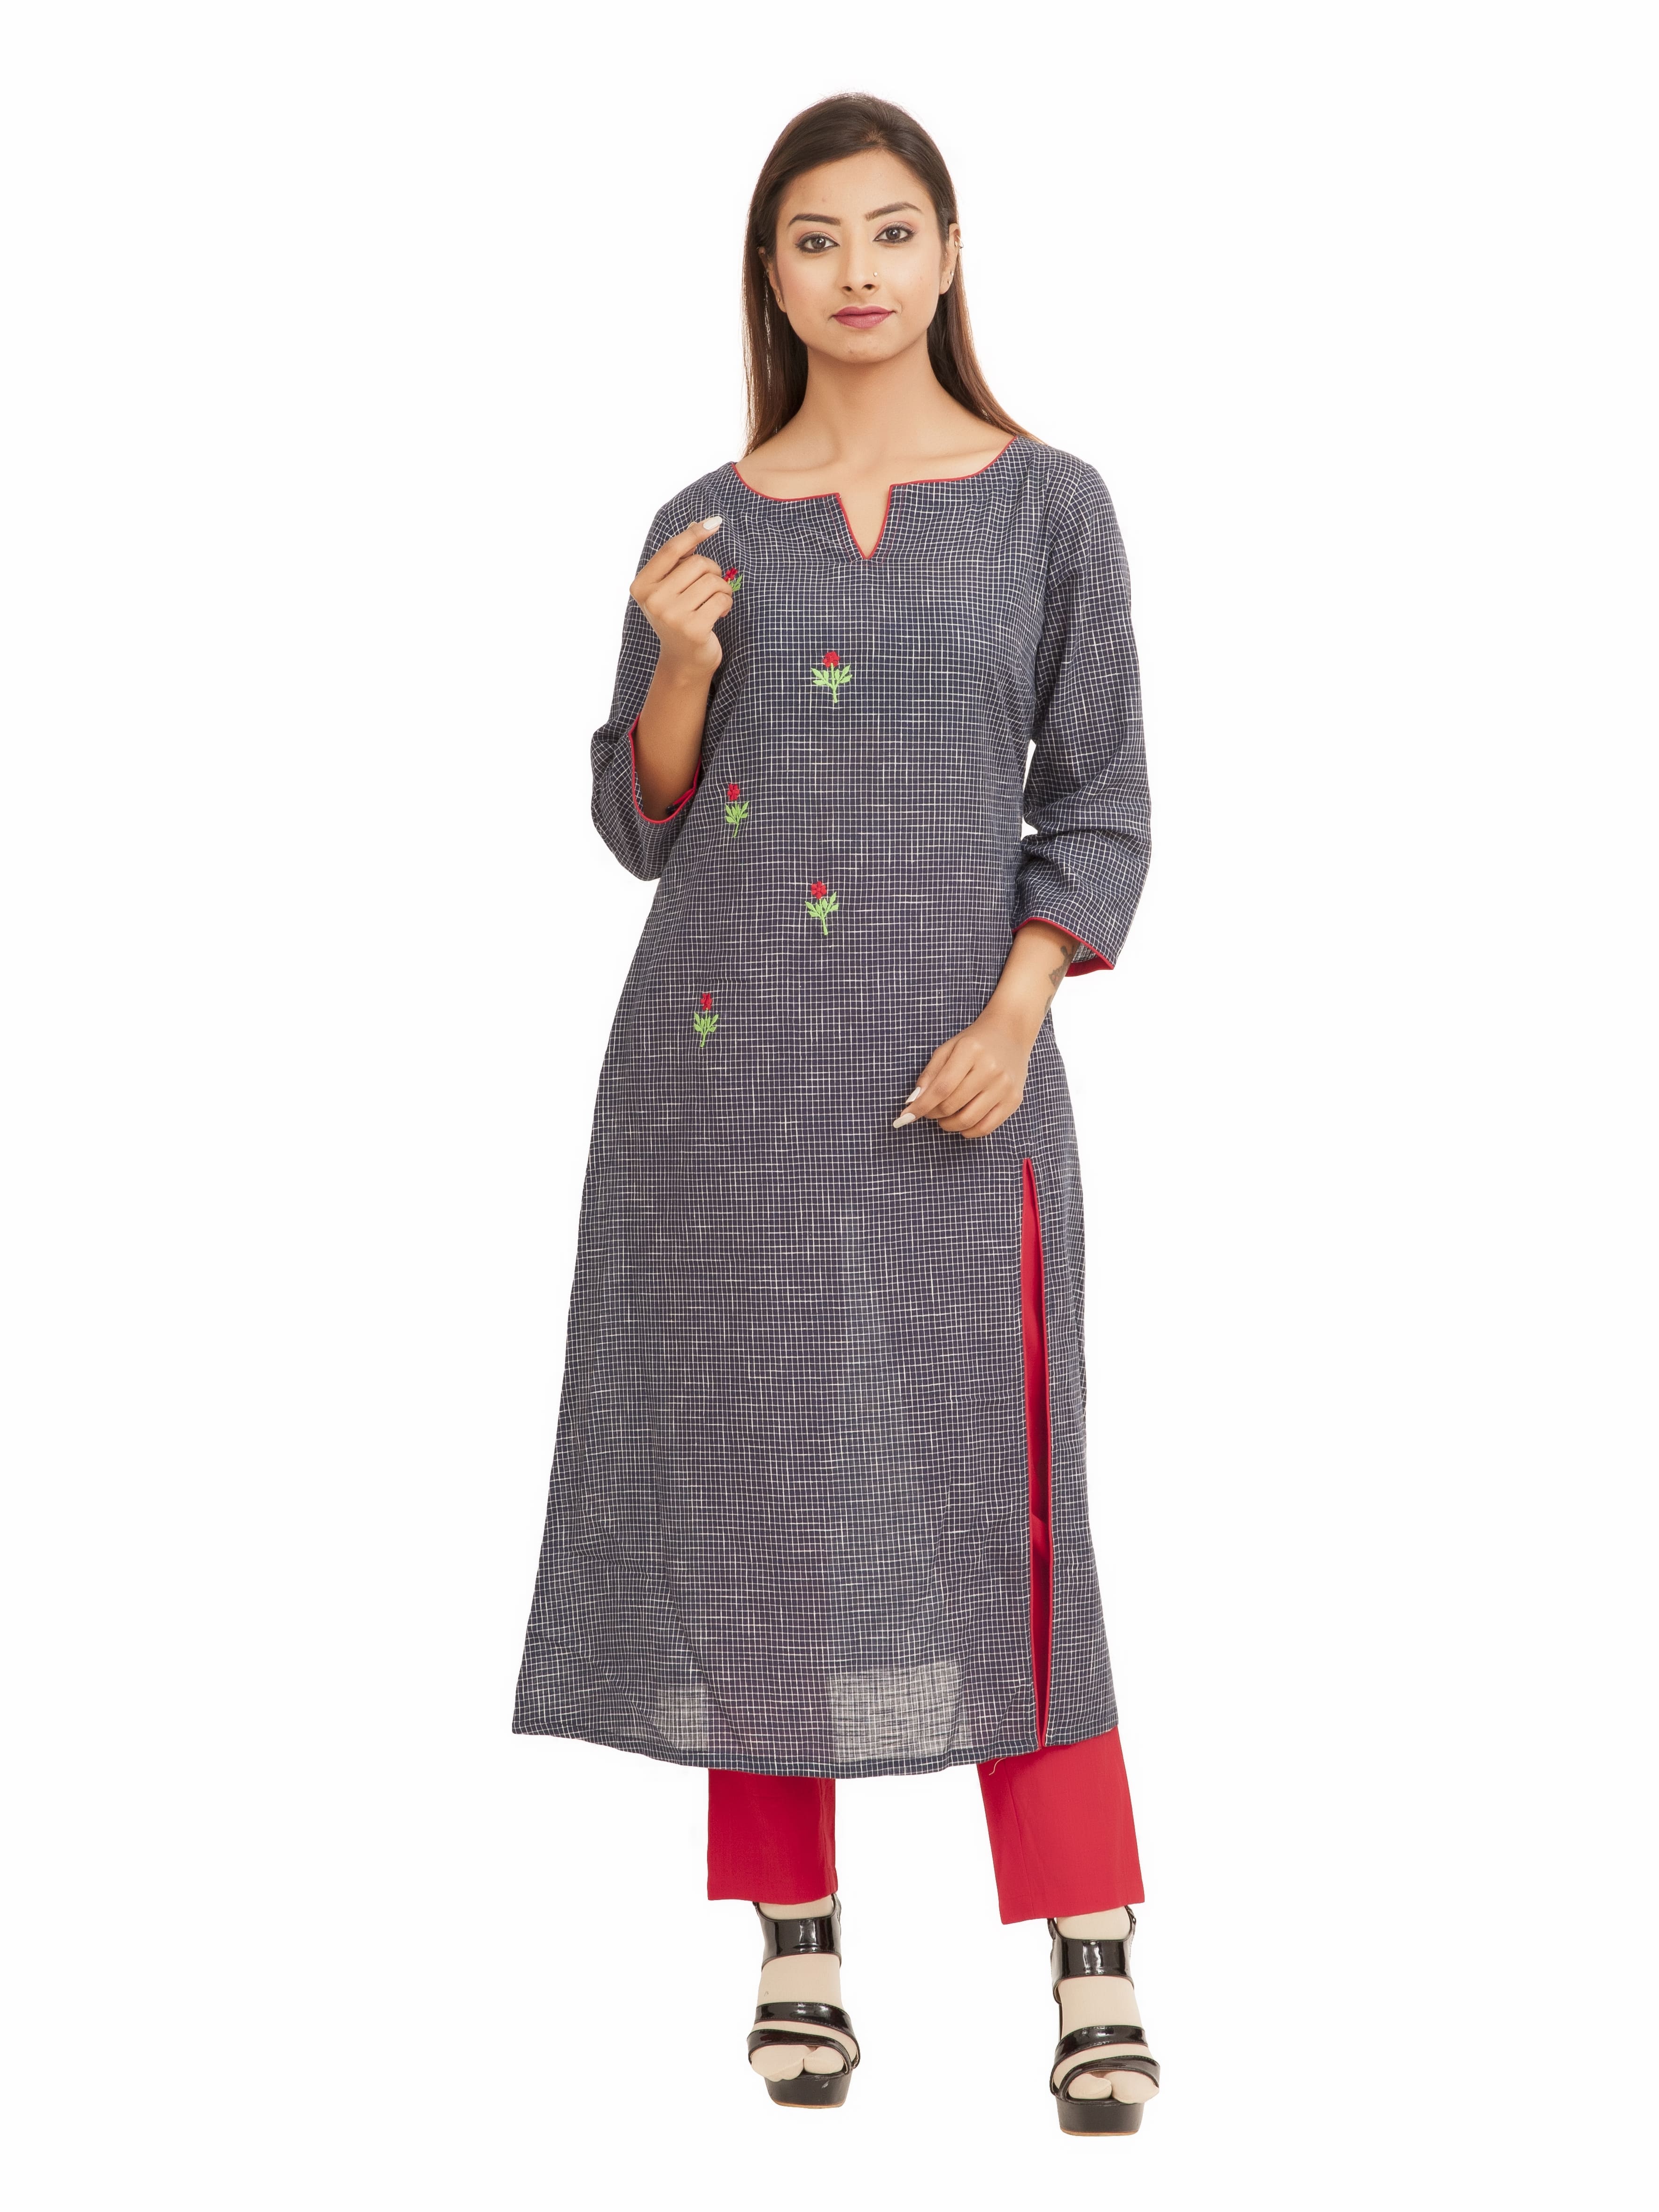 Western Clothing Wholesale Suppliers India